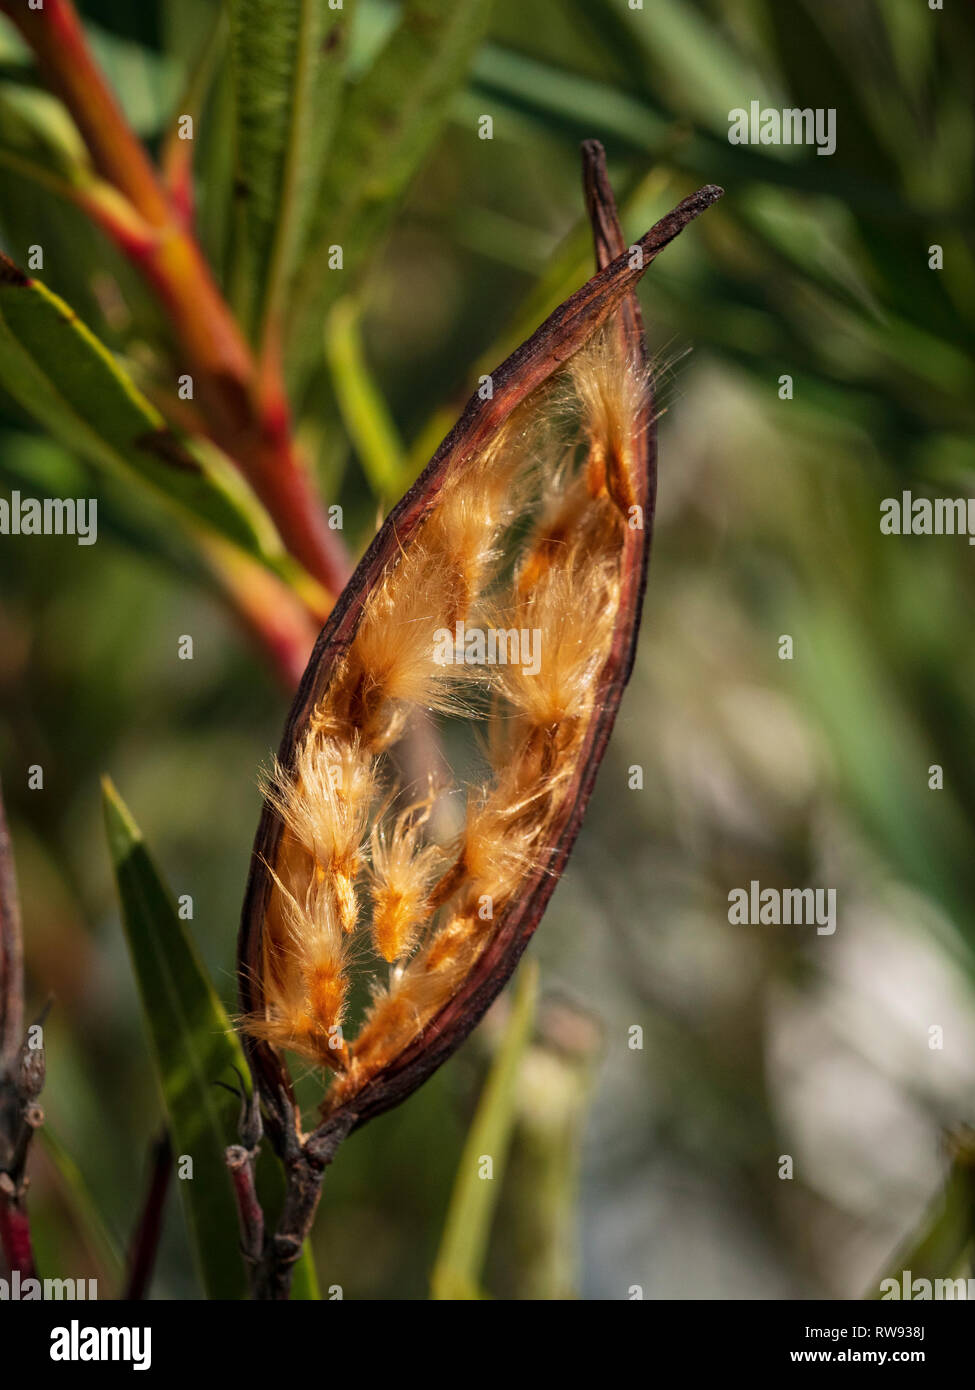 Nerium oleander. The seeds surrounded by hairs emerge from a dry fruit. Stock Photo